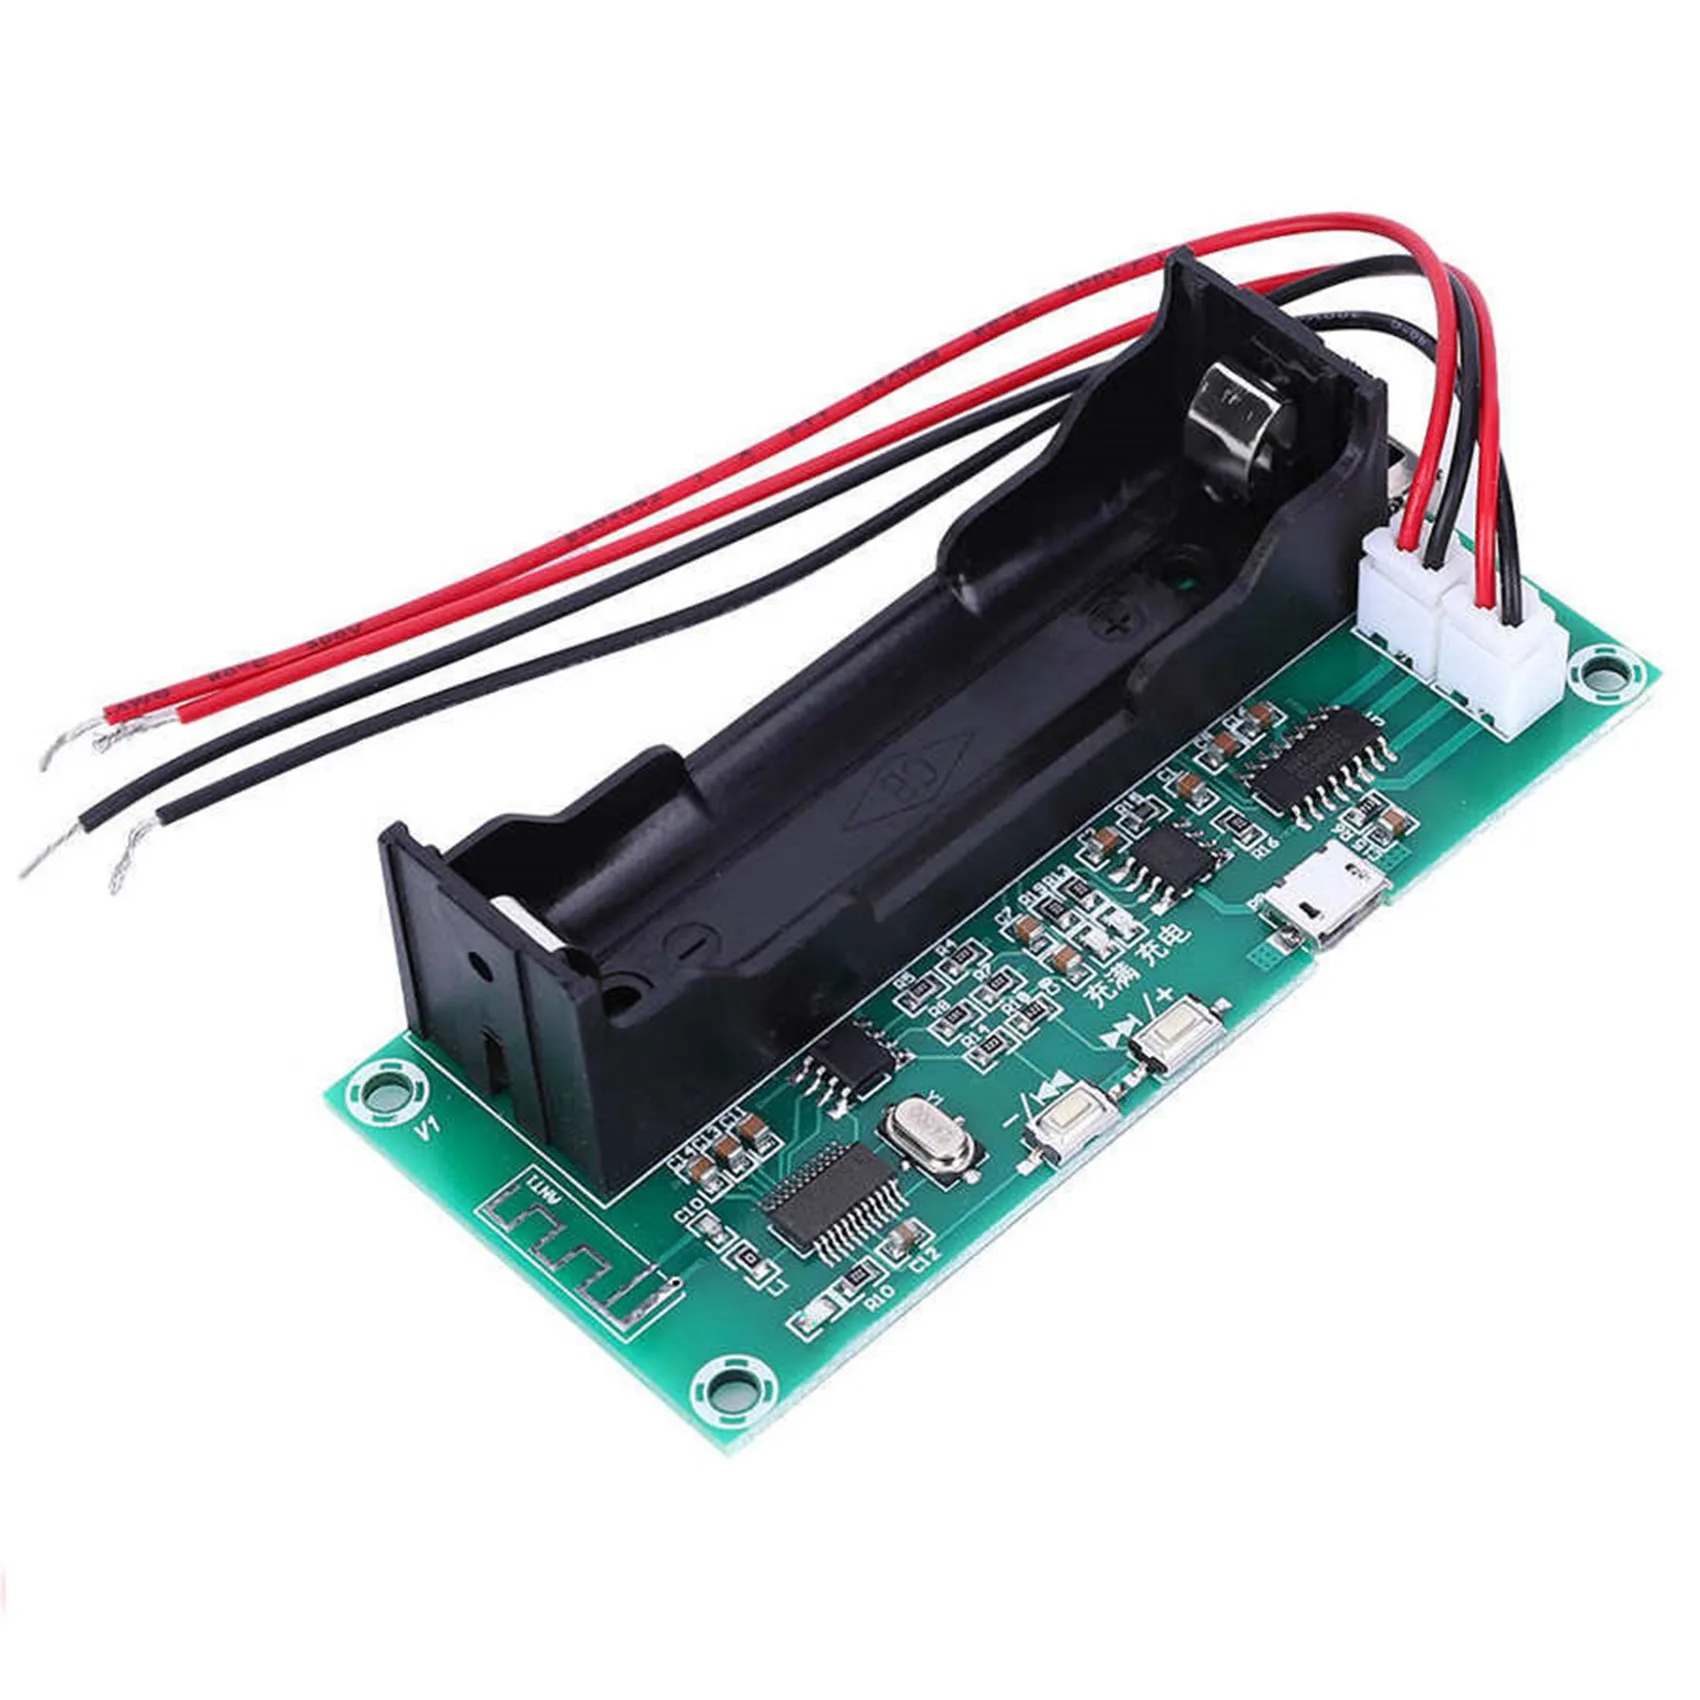 

XH-A153 PAM8403 Bluetooth Amplifier Board Lithium Battery BT5.0 Dual-Channel Stereo Low Power 3W+3W DC 5V Amplifier